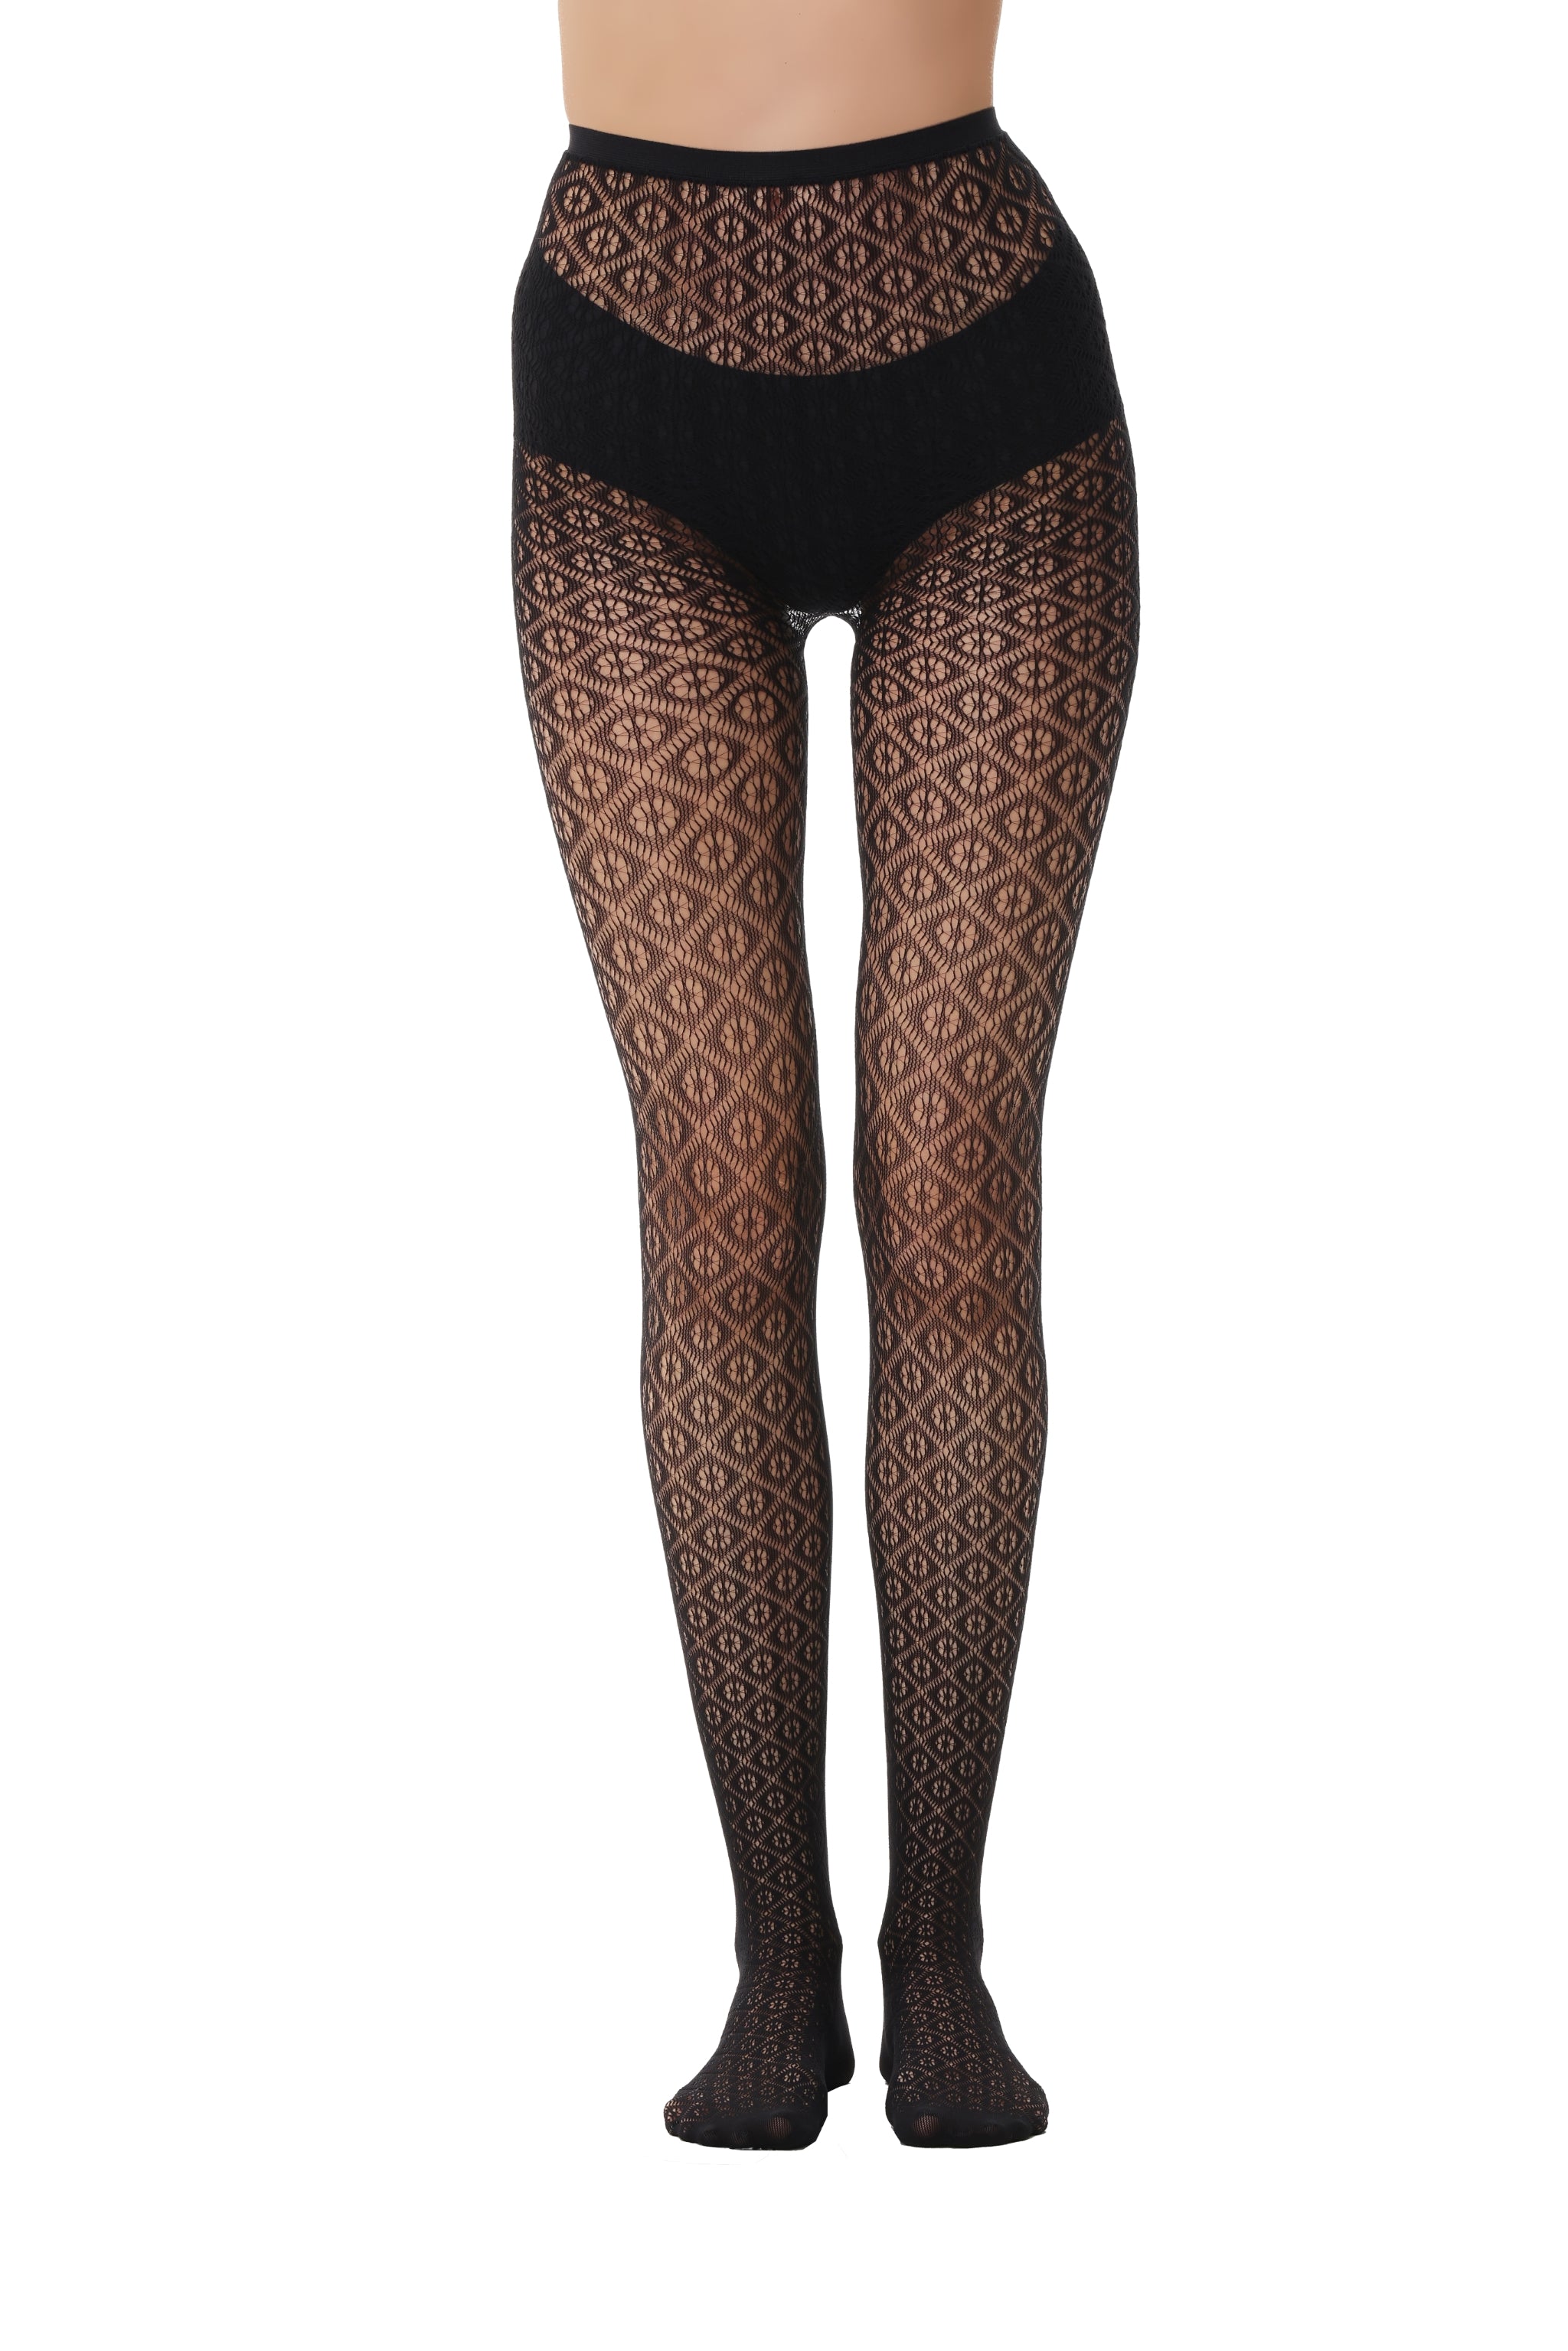 Fishnet Tights 110980 Front